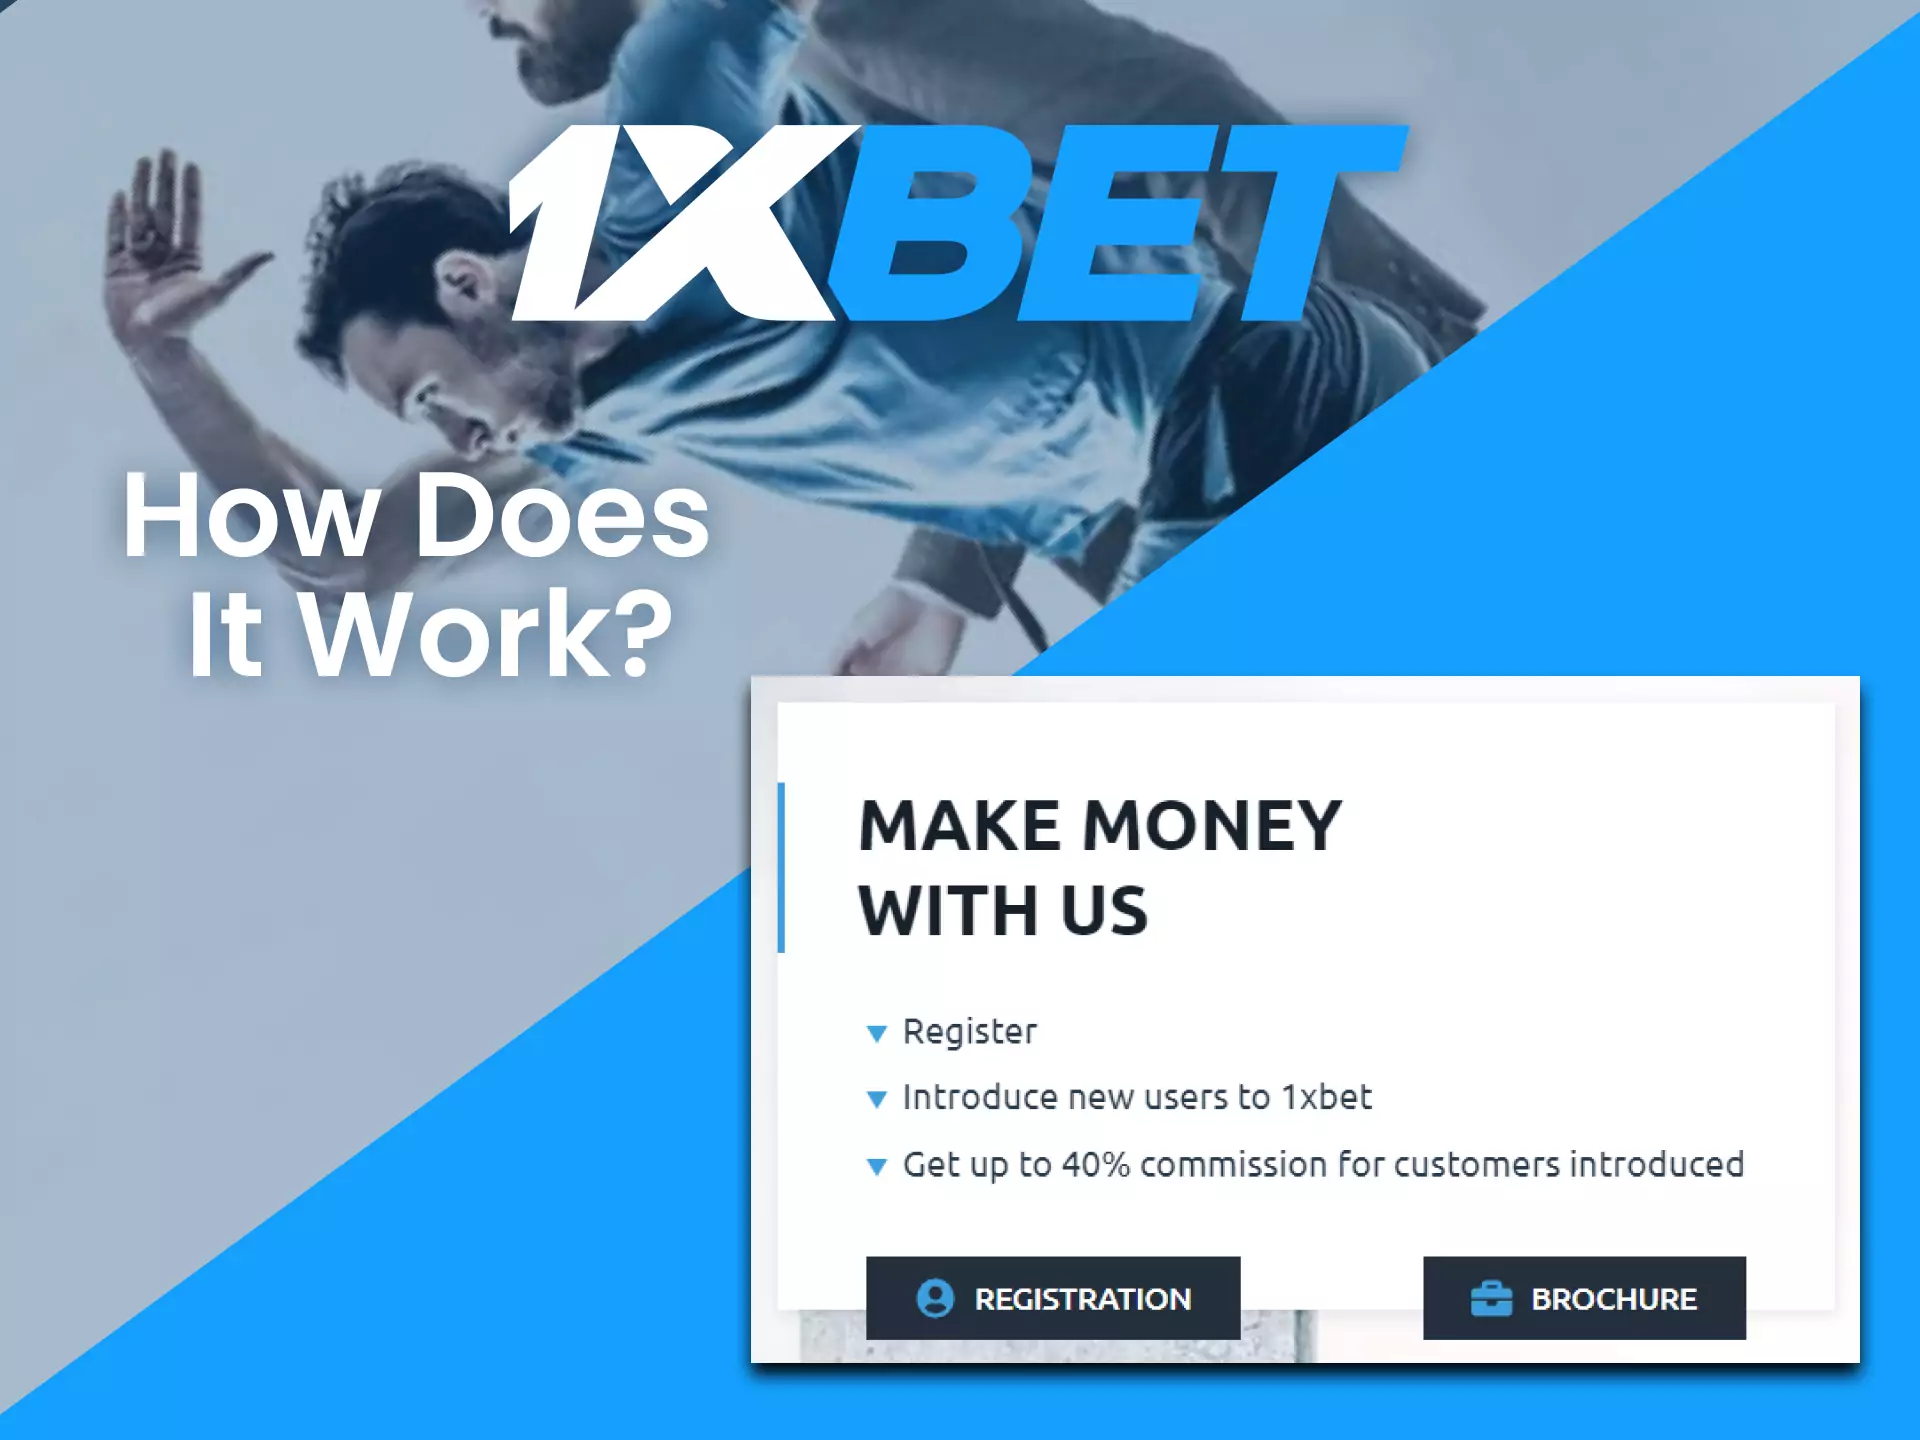 You can invite newcomers to the betting platform and get profit from the 1xbet affiliate program.